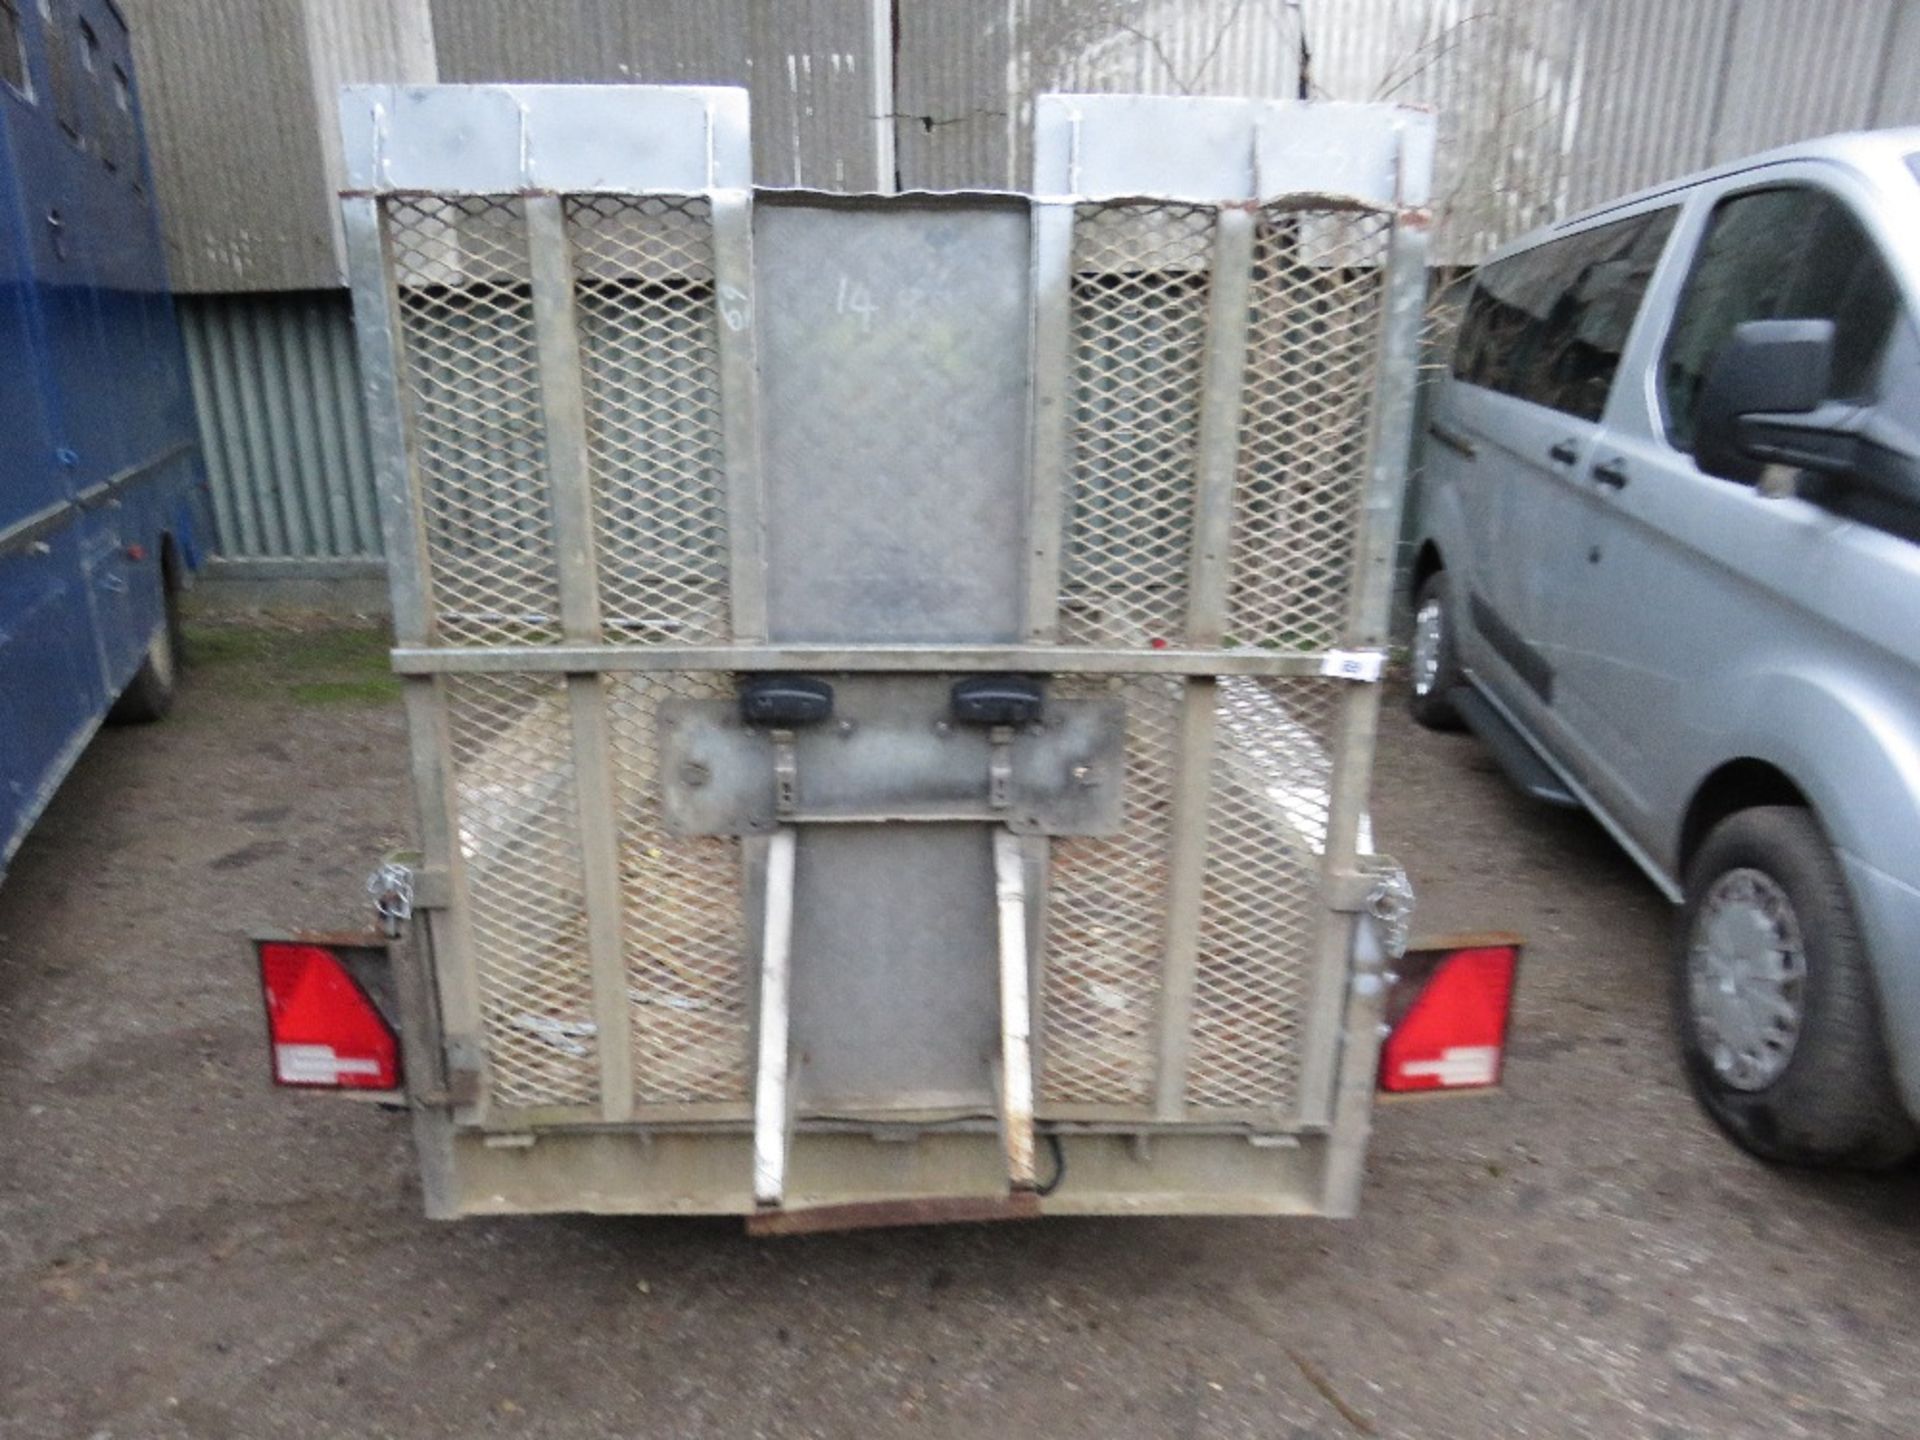 INDESPENSION 8FT X 4FT MINI EXCAVATOR TRAILER WITH DROP REAR RAMP. RING HITCH FITTED.